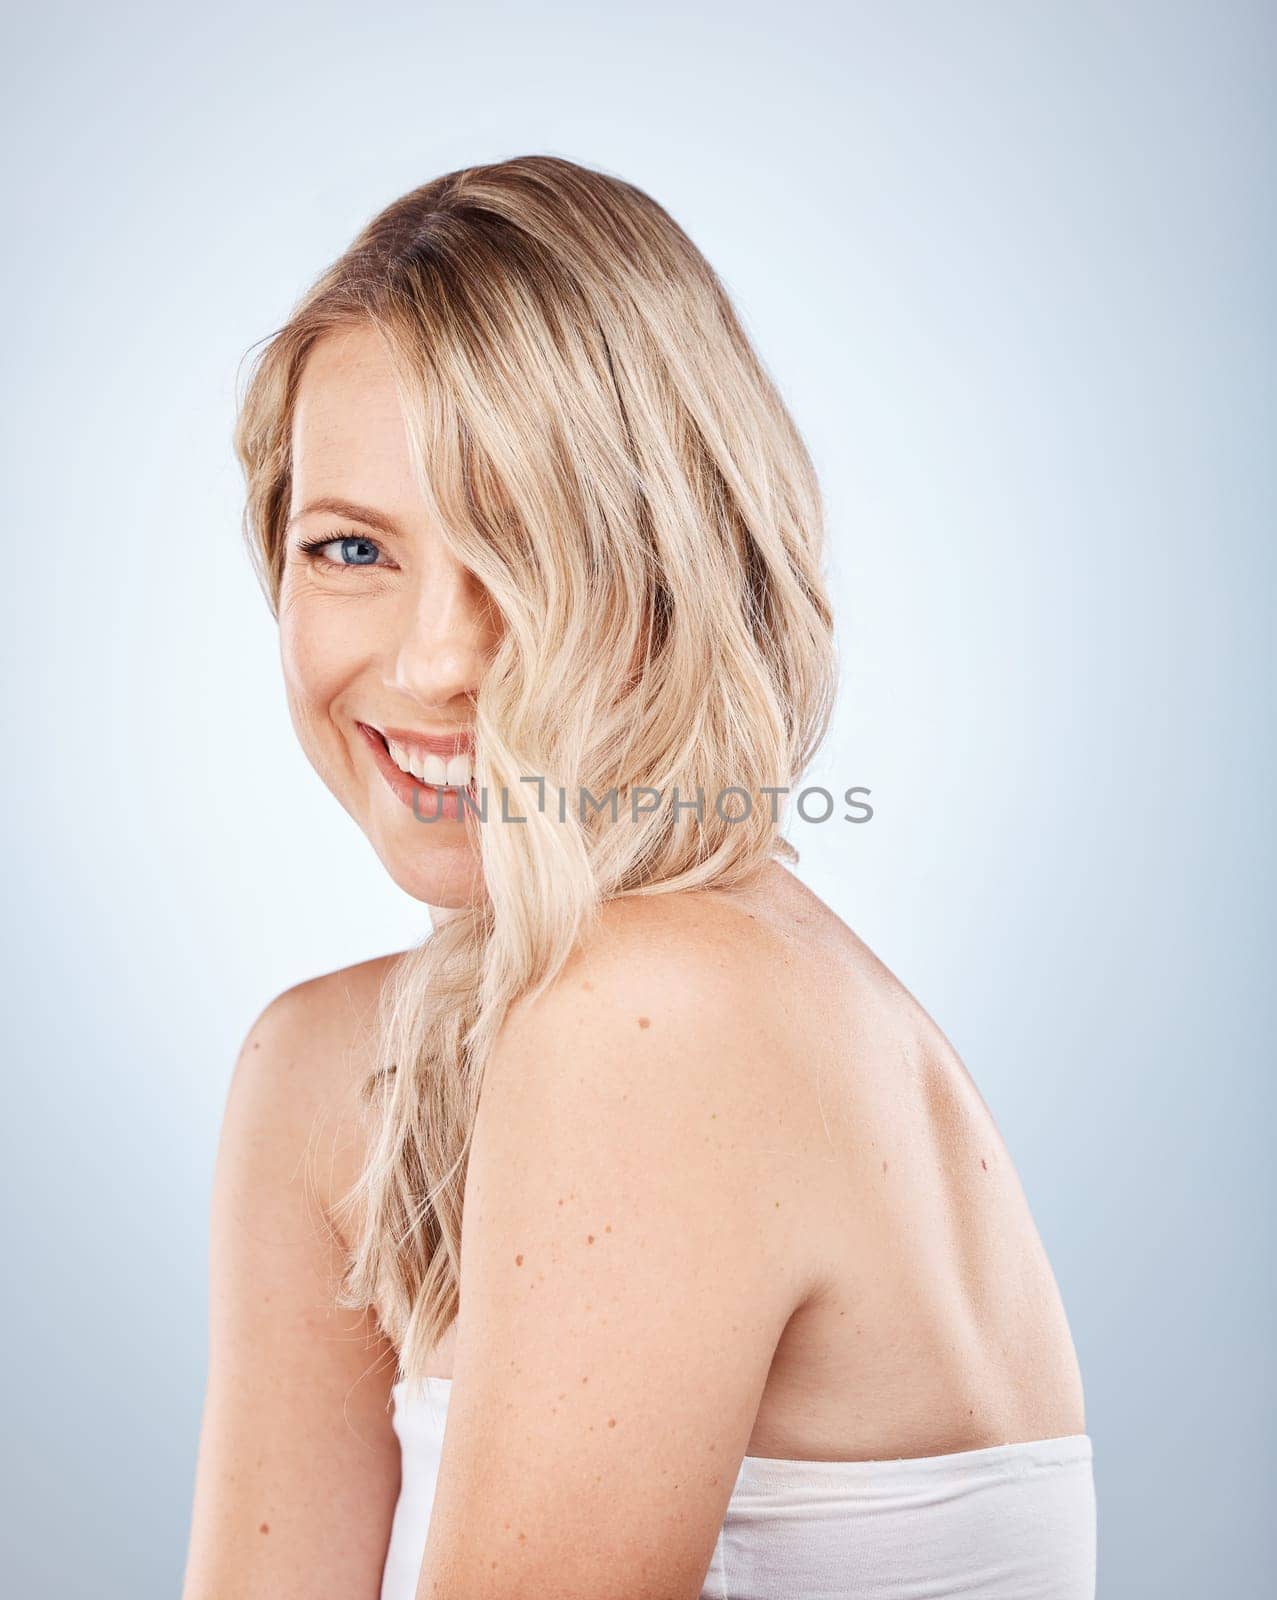 Hair, portrait and blonde woman with smile for haircare, styling and treatment on a white background. Hairstyle, waves and blond female with stylish glamour for healthy texture in a salon studio.